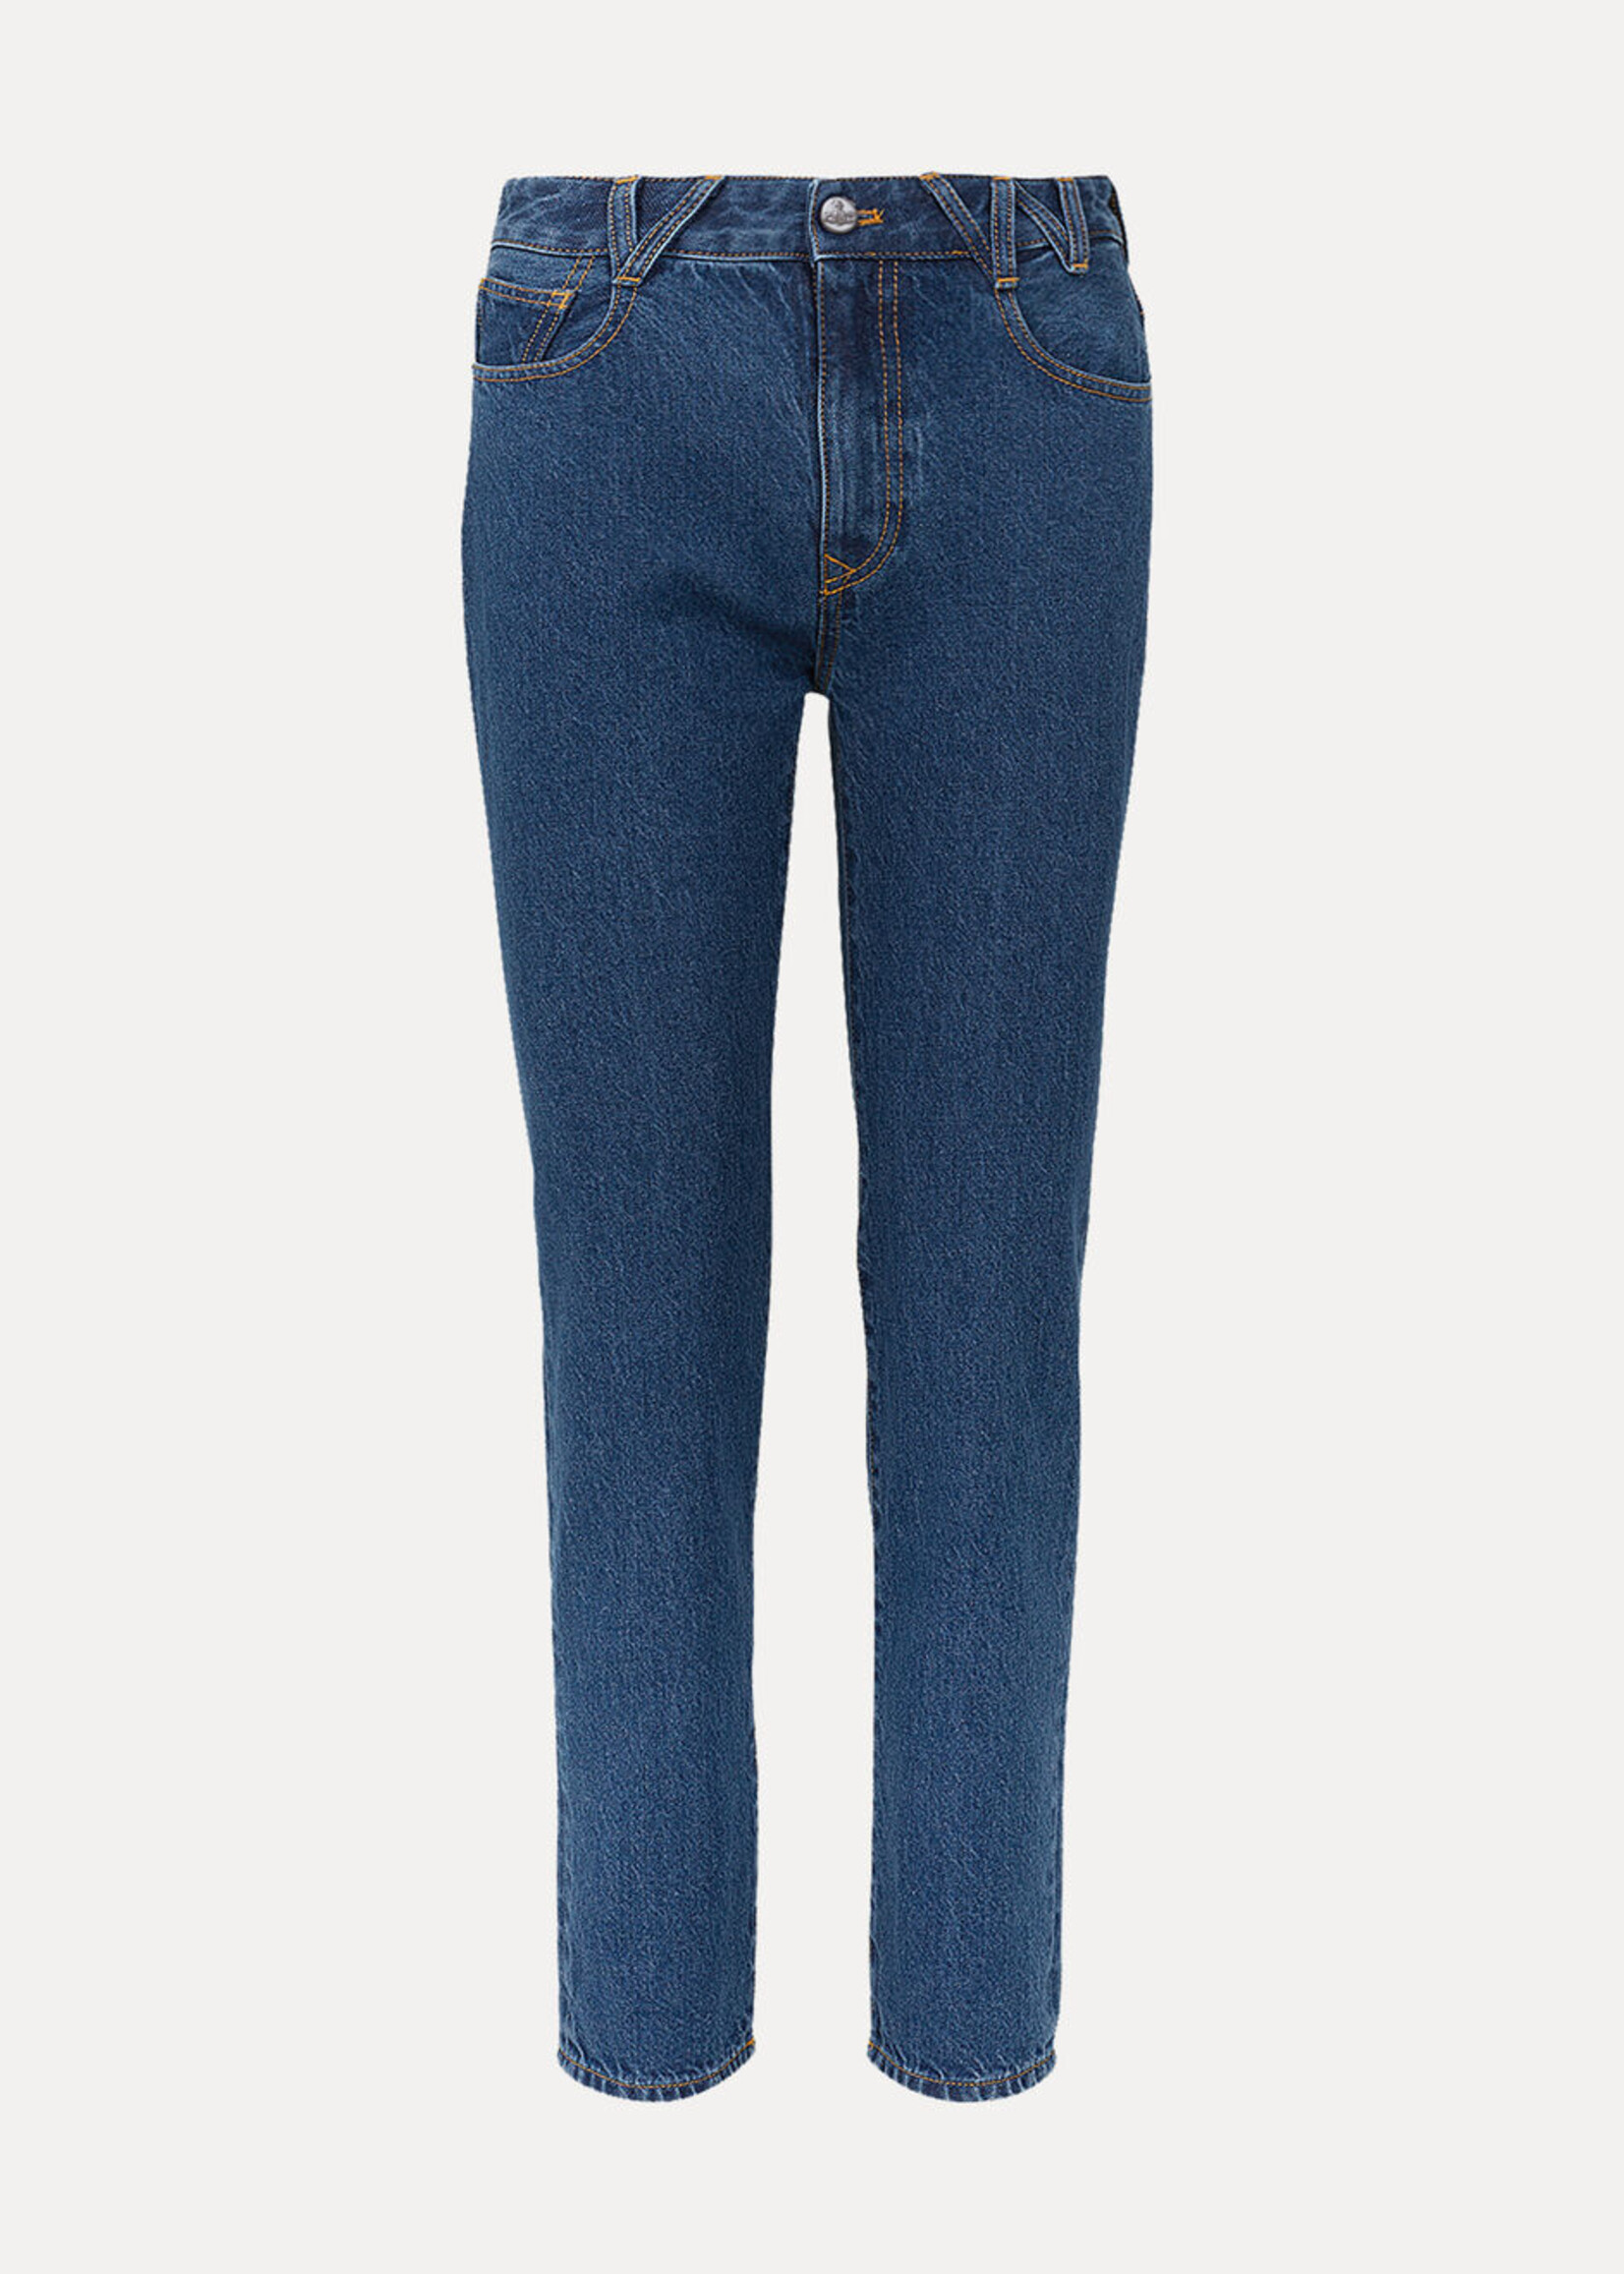 VIVIENNE WESTWOOD Classic Tapered Logo Jeans